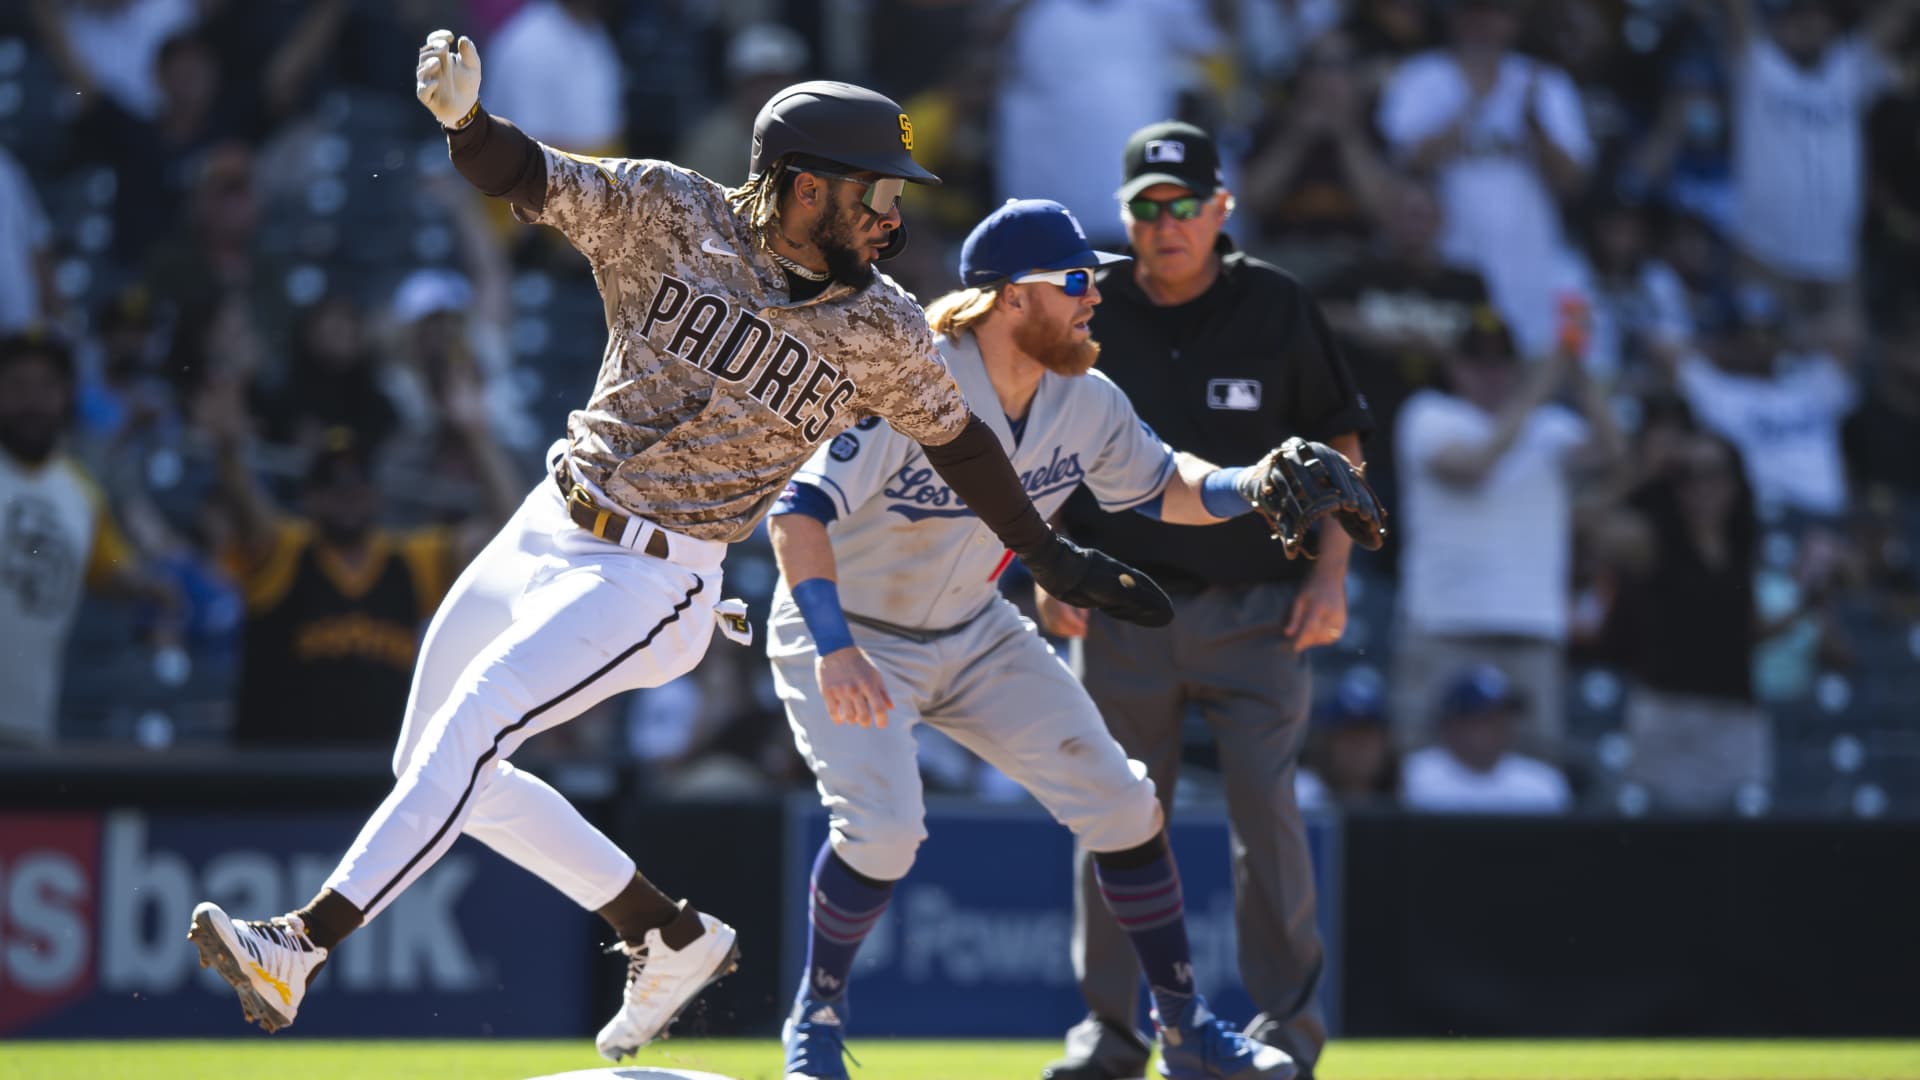 Padres vs. Dodgers live stream: How to watch the ESPN game via